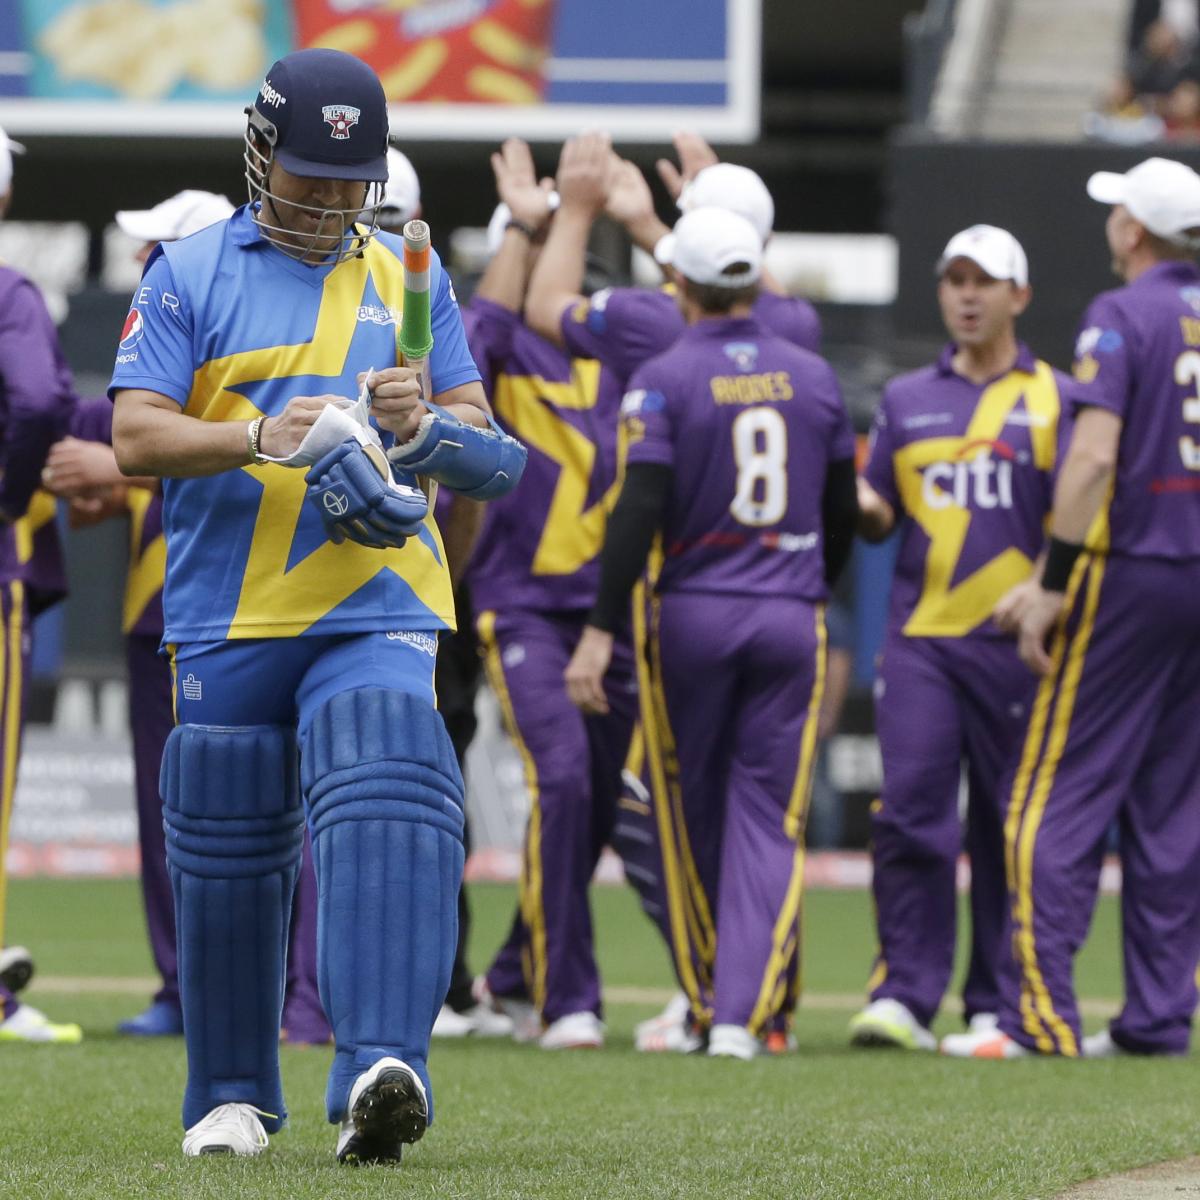 Cricket All-Stars 2015: Teams, Live Stream, TV Info and Preview for ...